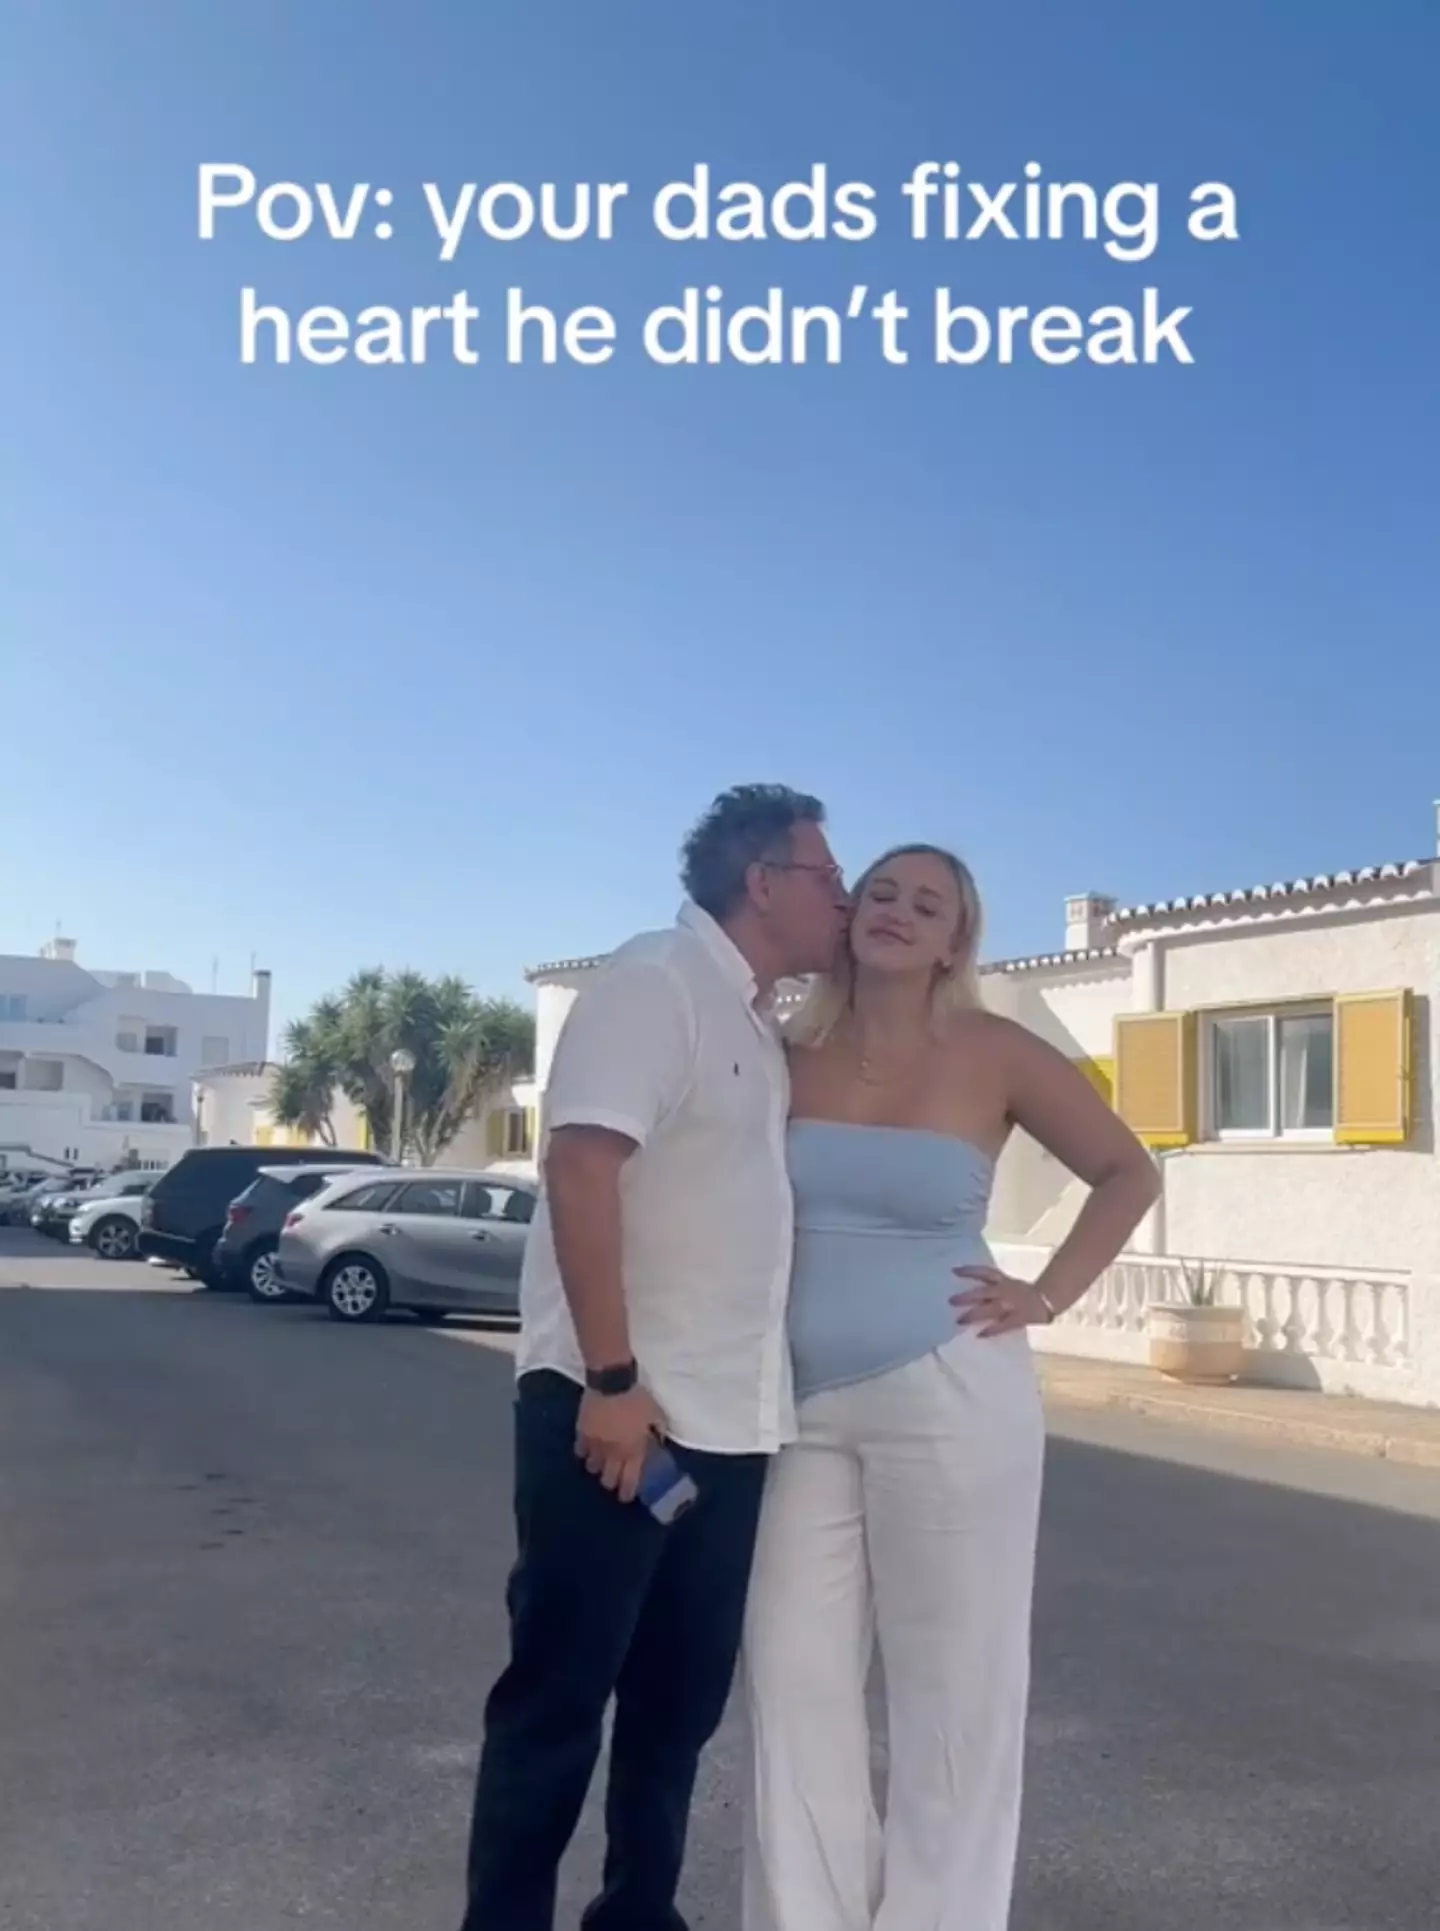 Emma and her dad are in holiday in Portugal.